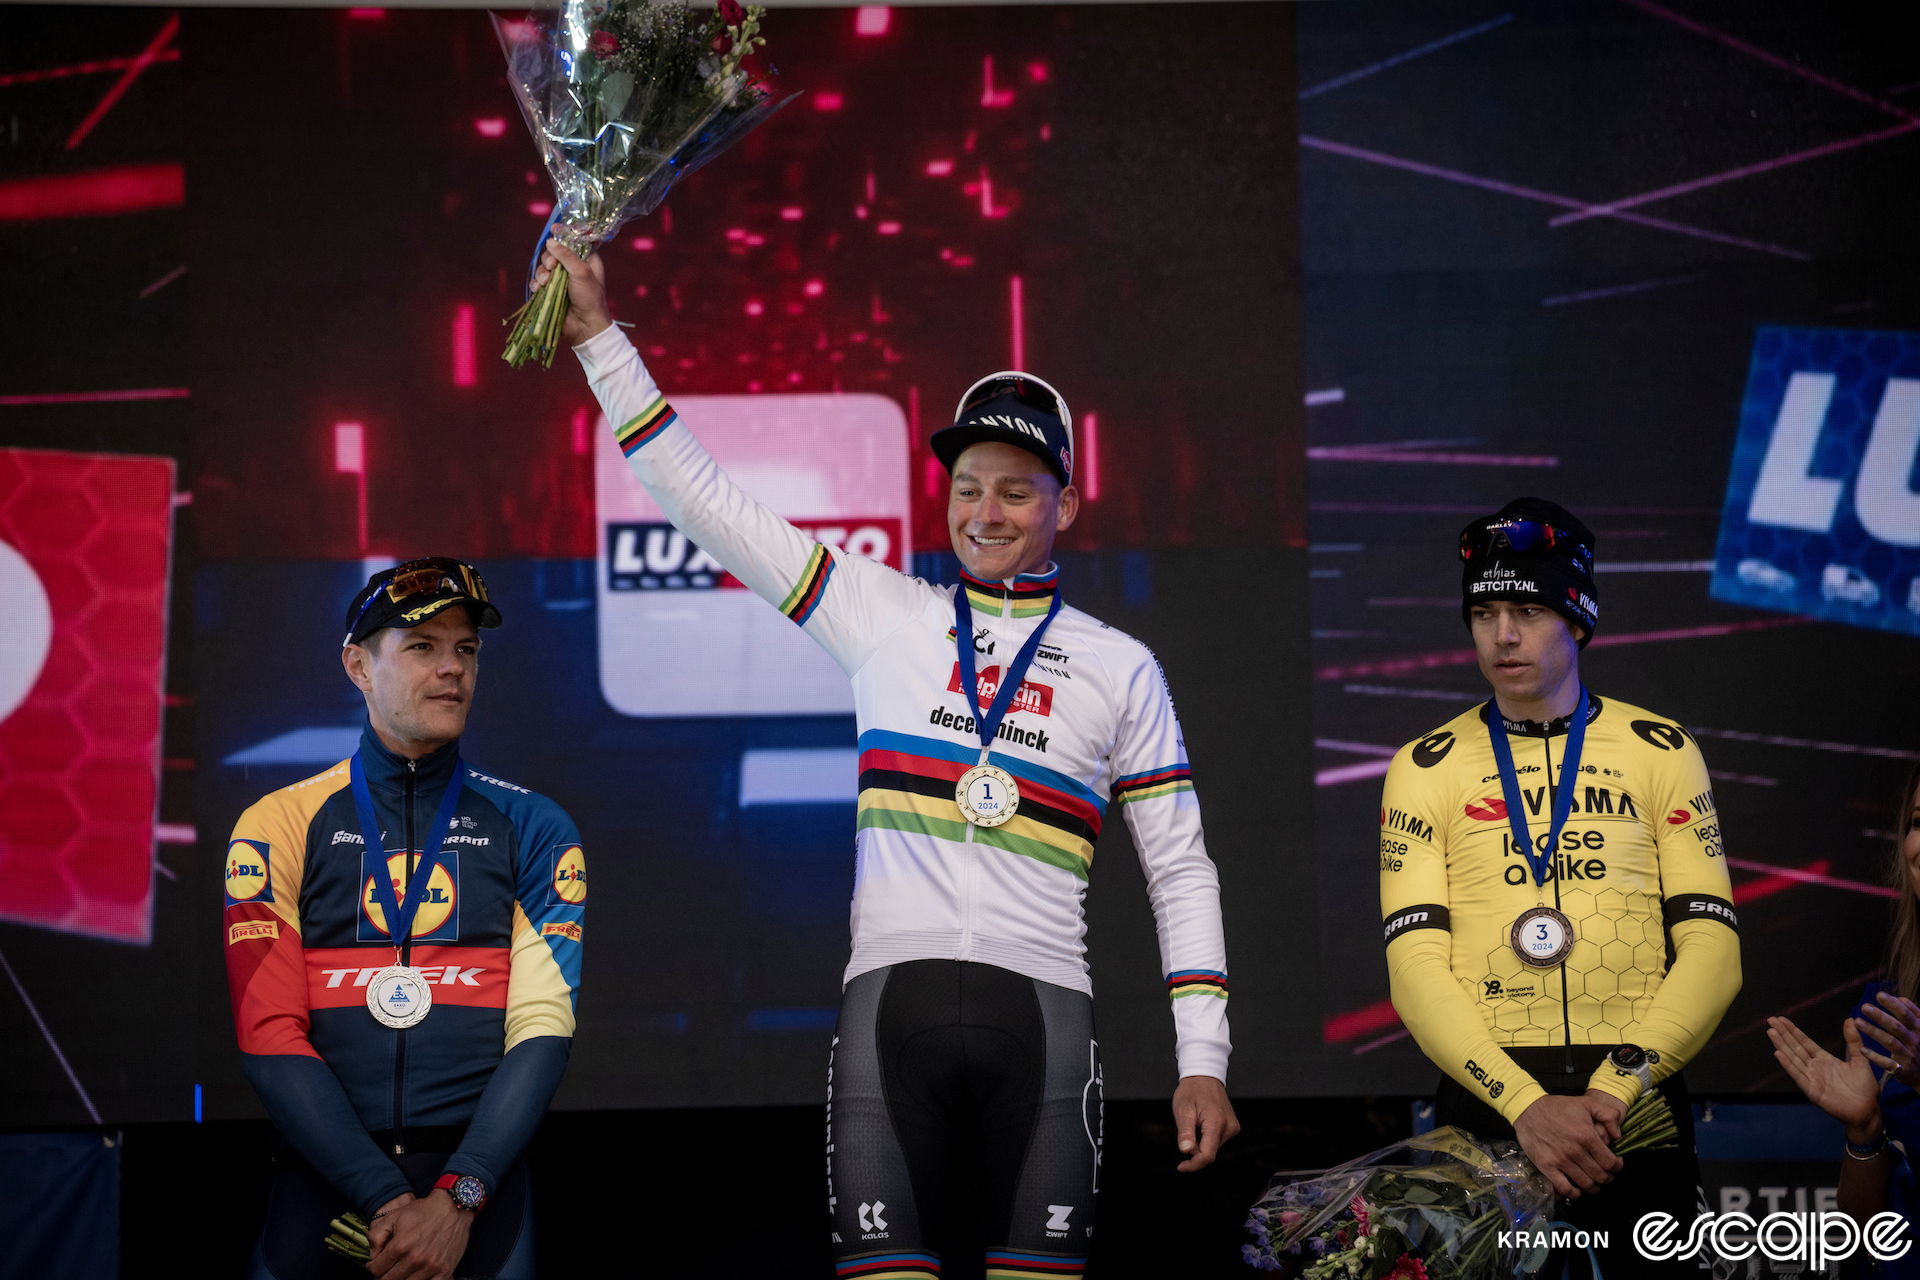 From left to right, Jasper Stuyven, Mathieu van der Poel and Wout van Aert stand on the podium at E3 Prijs. Van der Poel steps forward with a bouquet of flowers raised in one hand and a first place medal around his neck. To his left, Van Aert, with a third-place medal, looks on with a sideways glance and neutral expression.